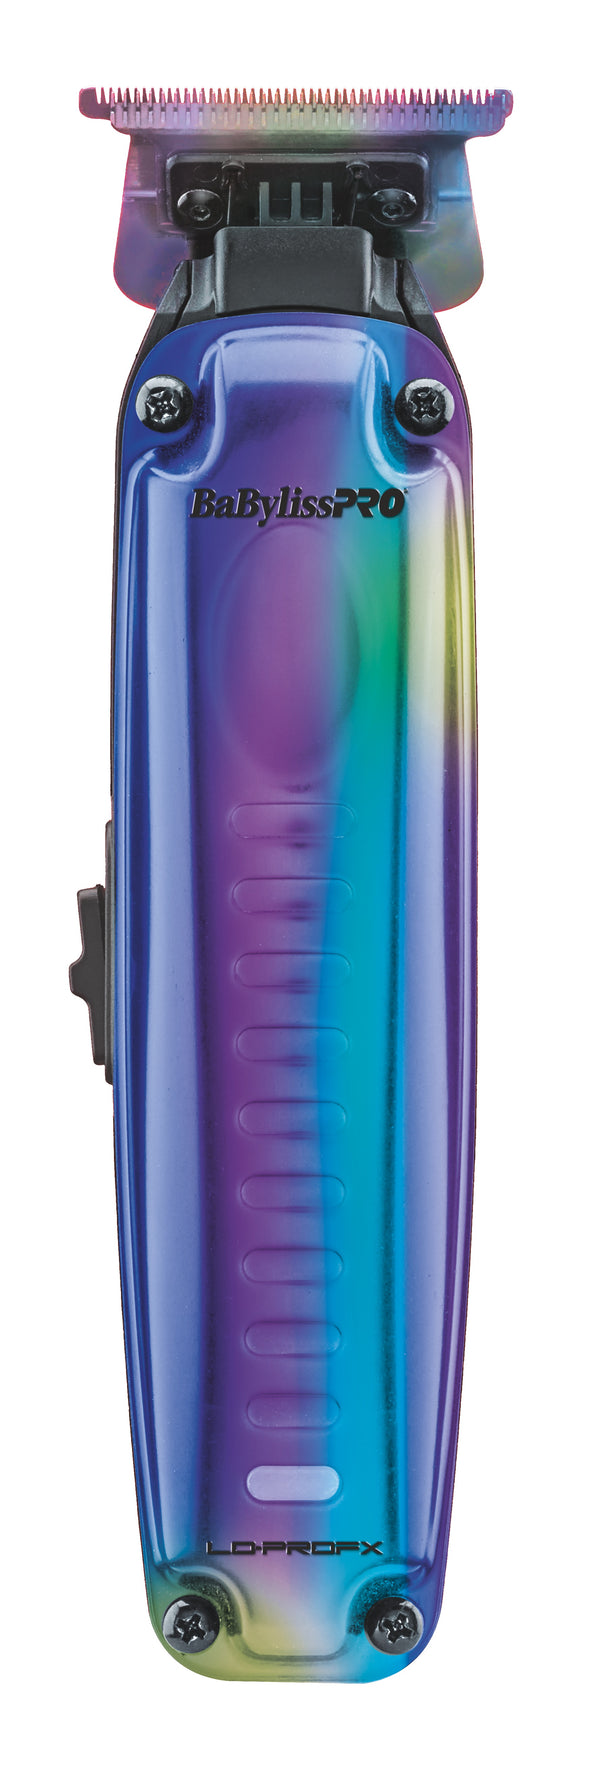 BaBylissPRO Limited Edition Iridescent Lo-PRO FX High Performance Low-Profile Trimmer (FX726RB)